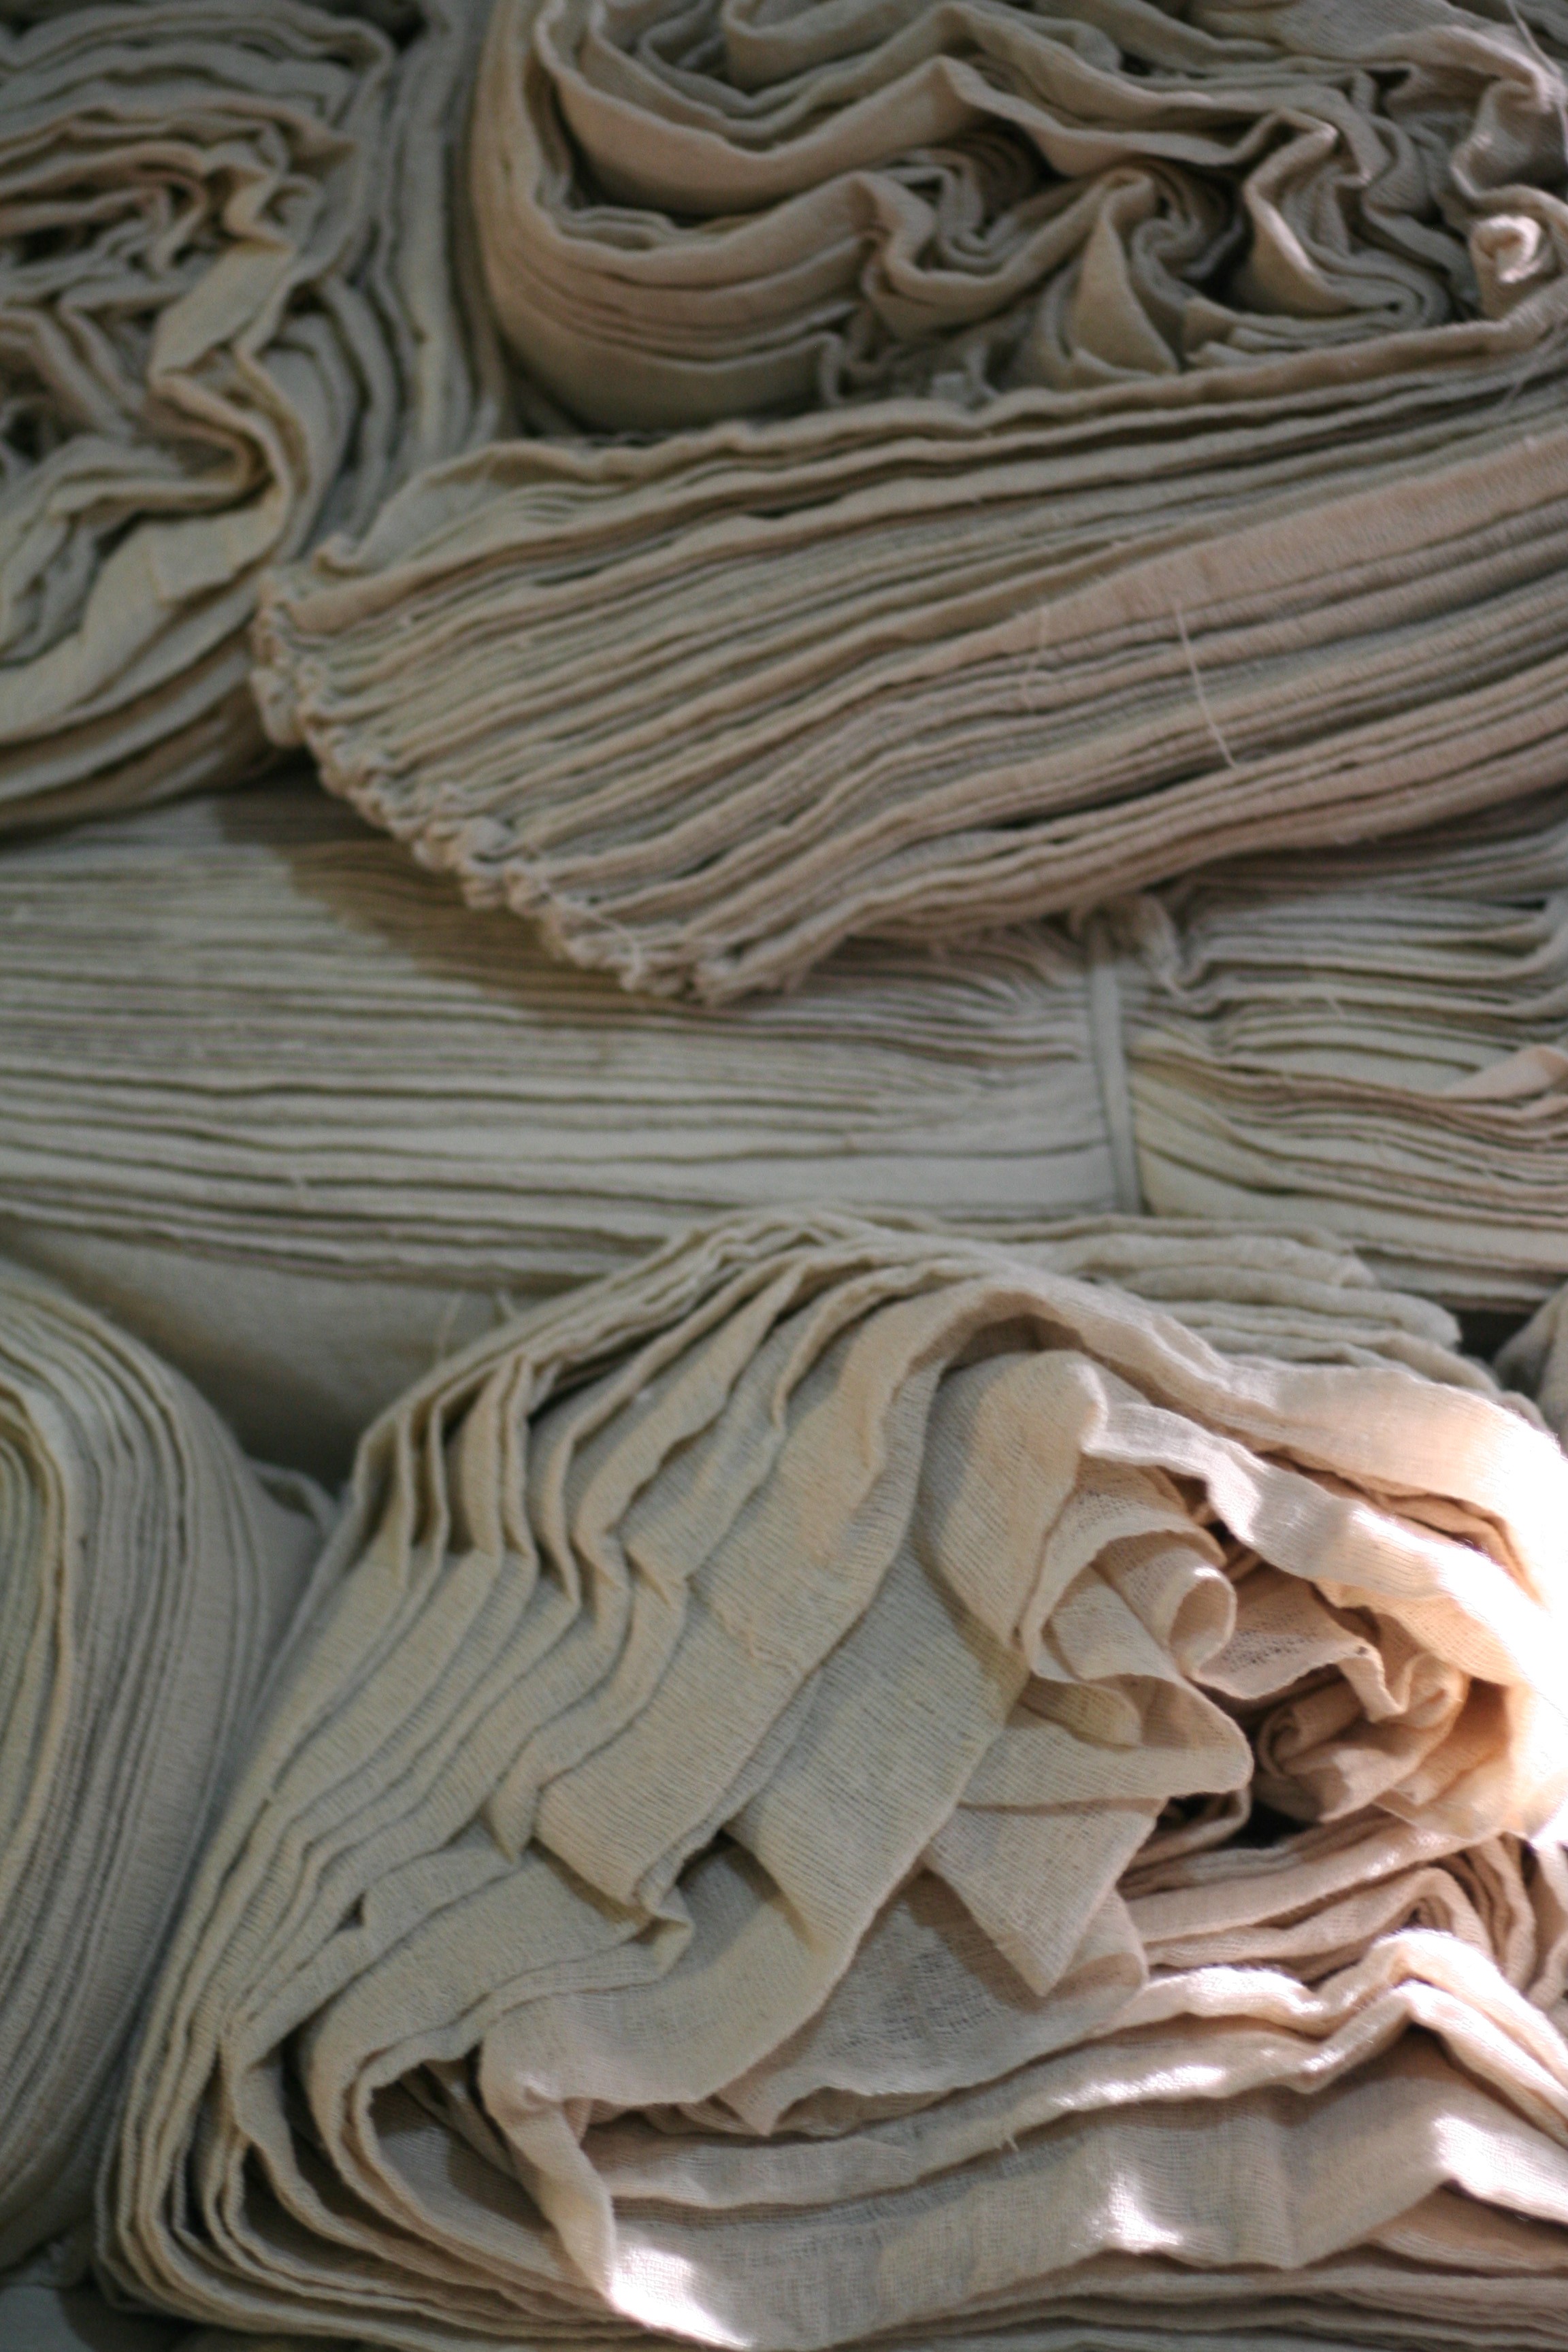 'Grey' or 'greige' fabric ready for bleaching